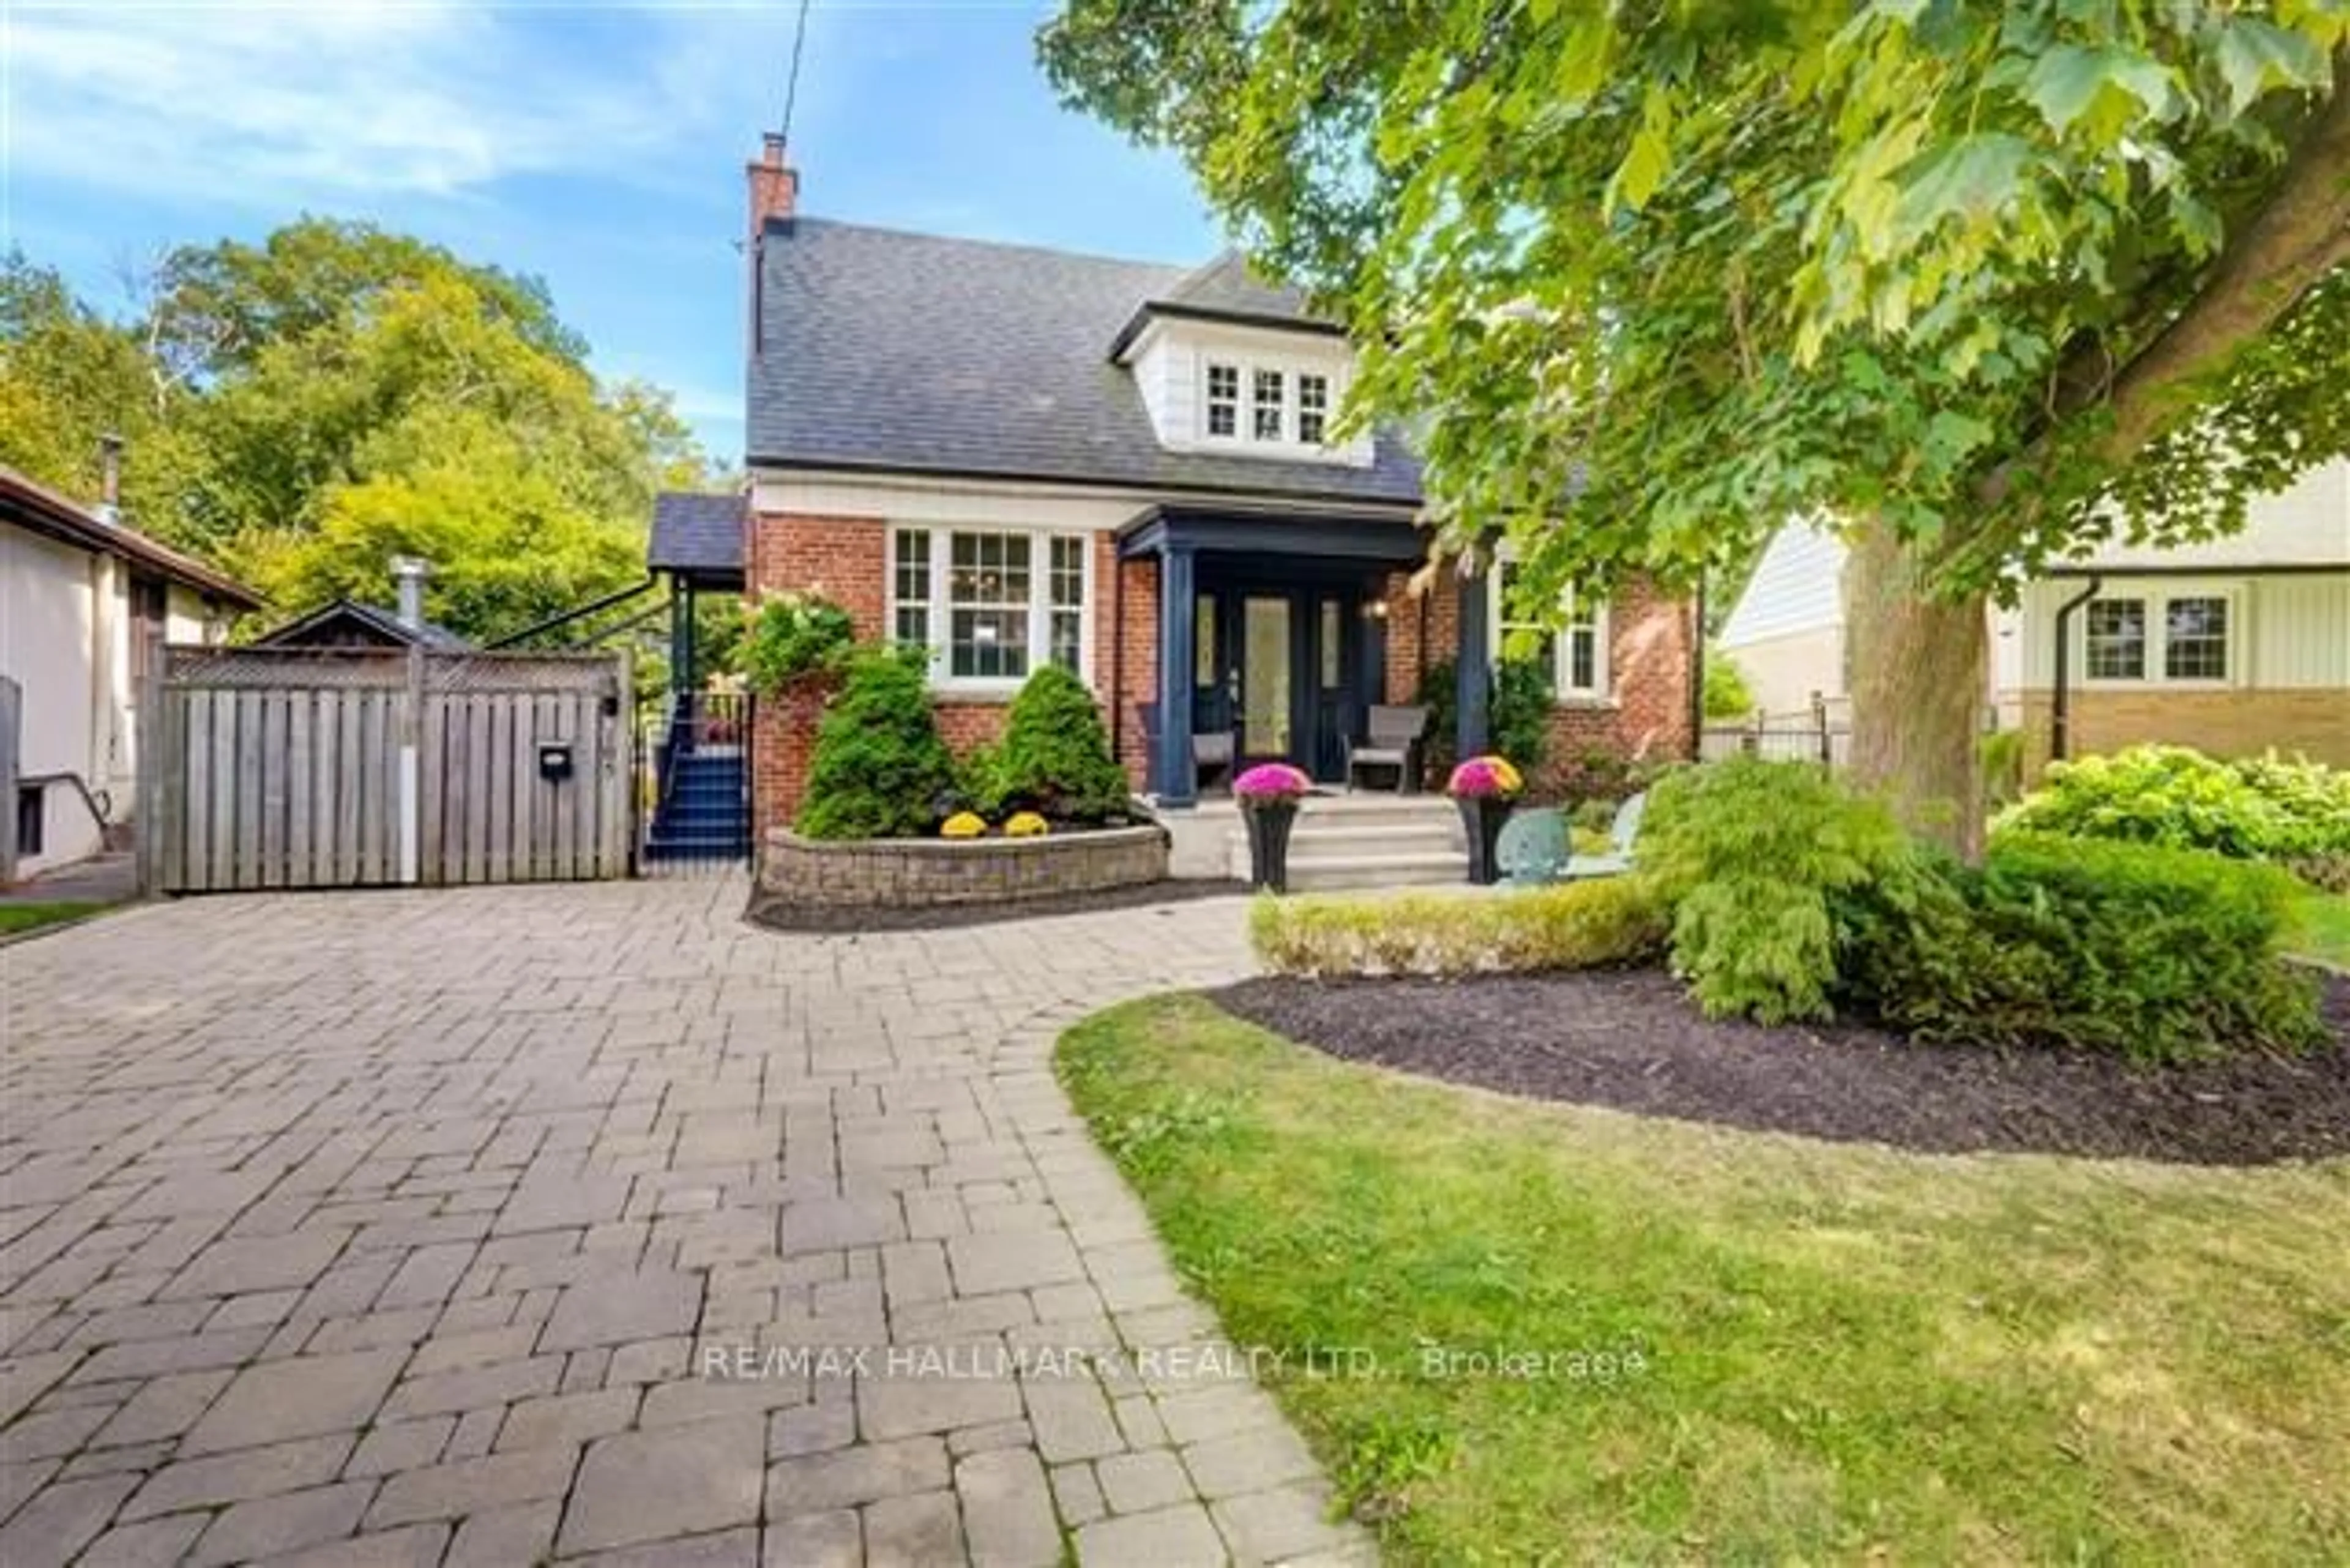 Home with brick exterior material for 105 Cliffcrest Dr, Toronto Ontario M1M 2K1